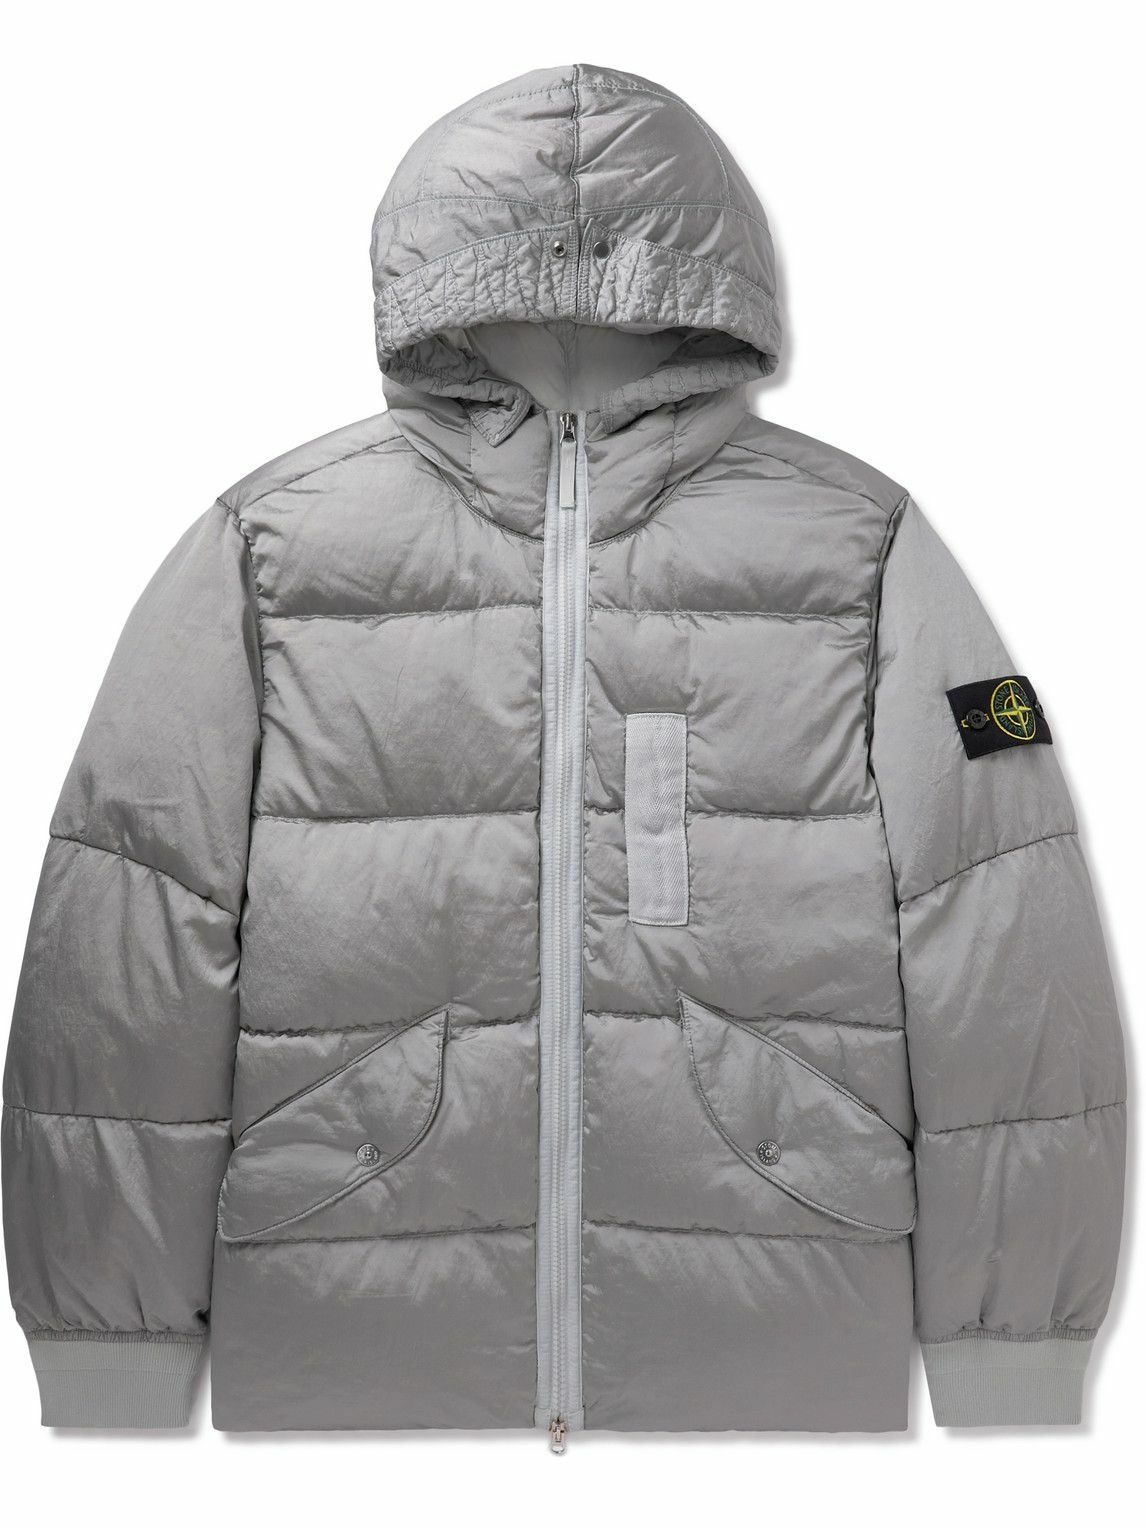 Stone Island - Logo-Appliquéd Quilted Crinkled-Shell Hooded Down Jacket -  Gray Stone Island